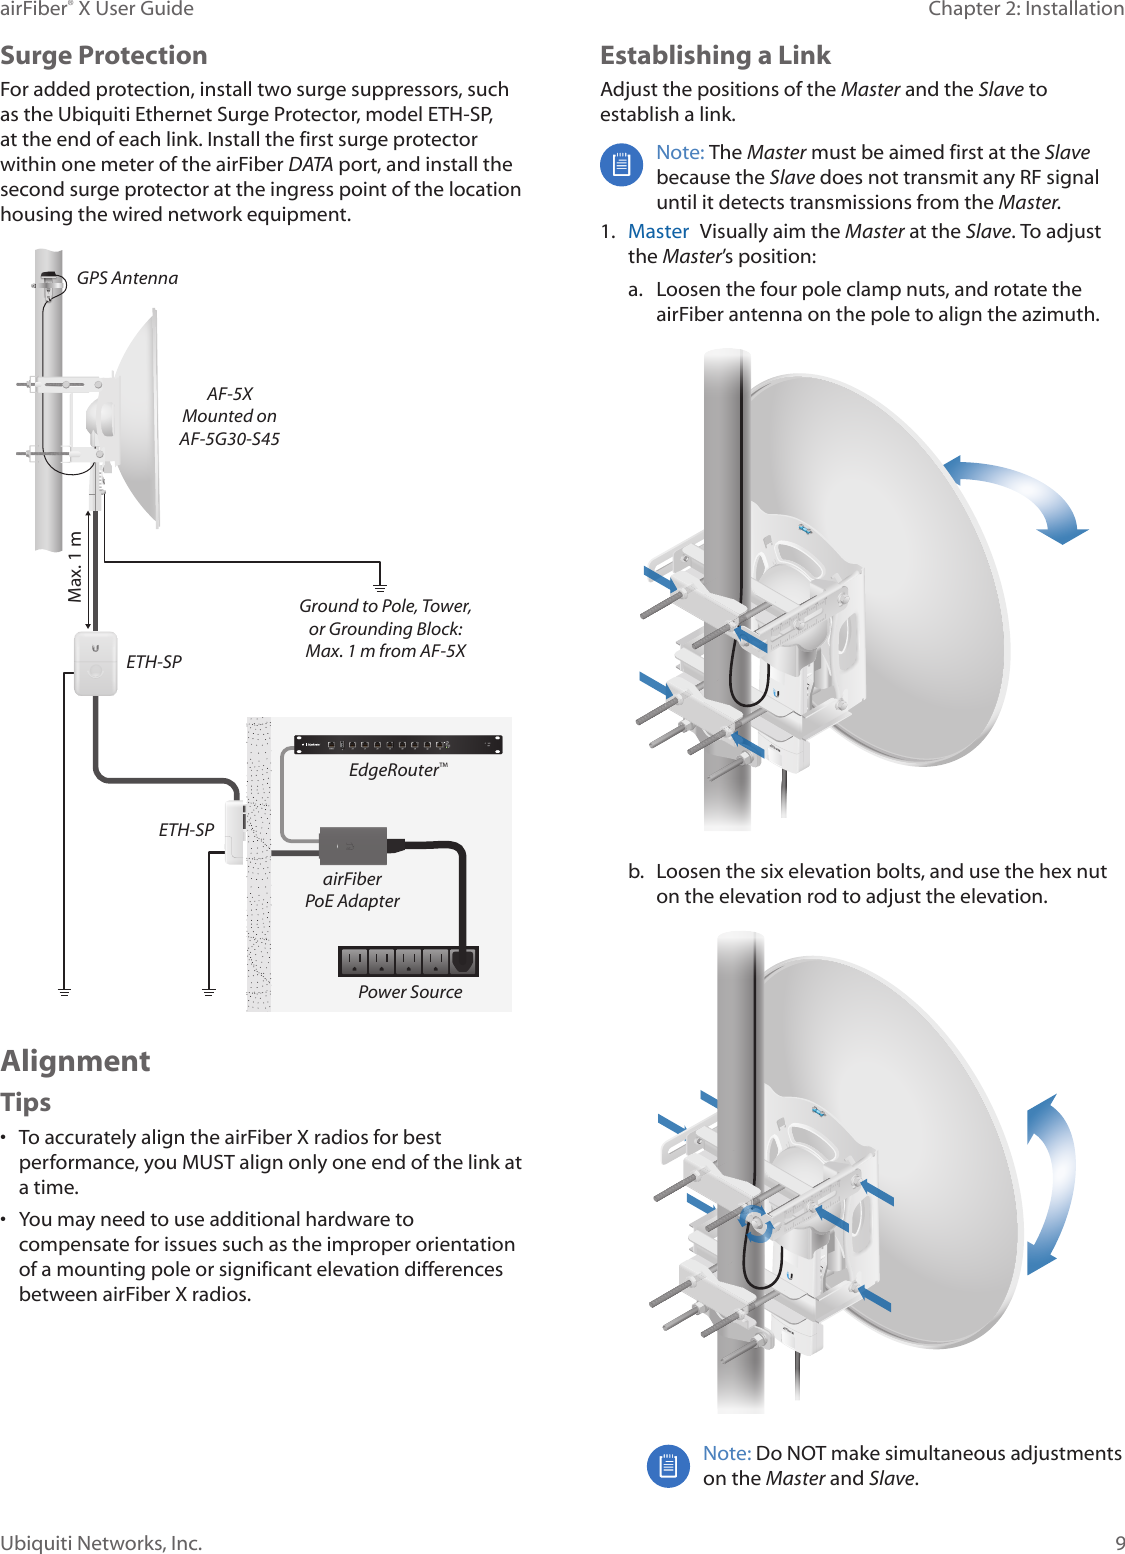 9Chapter 2: InstallationairFiber® X User GuideUbiquiti Networks, Inc.Surge ProtectionFor added protection, install two surge suppressors, such as the Ubiquiti Ethernet Surge Protector, model ETH-SP, at the end of each link. Install the first surge protector within one meter of the airFiber DATA port, and install the second surge protector at the ingress point of the location housing the wired network equipment.Ground to Pole, Tower,or Grounding Block:Max. 1 m from AF-5XMax. 1 mairFiberPoE AdapterEdgeRouter™Power SourceETH-SPGPS AntennaETH-SPAF-5XMounted onAF-5G30-S45AlignmentTips•  To accurately align the airFiberX radios for best performance, you MUST align only one end of the link at a time.•  You may need to use additional hardware to compensate for issues such as the improper orientation of a mounting pole or significant elevation differences between airFiberX radios.Establishing a LinkAdjust the positions of the Master and the Slave to establish a link. Note: The Master must be aimed first at the Slave because the Slave does not transmit any RF signal until it detects transmissions from the Master. 1.  Master  Visually aim the Master at the Slave. To adjust the Master’s position:a.  Loosen the four pole clamp nuts, and rotate the airFiber antenna on the pole to align the azimuth.b.  Loosen the six elevation bolts, and use the hex nut on the elevation rod to adjust the elevation.Note: Do NOT make simultaneous adjustments on the Master and Slave. 